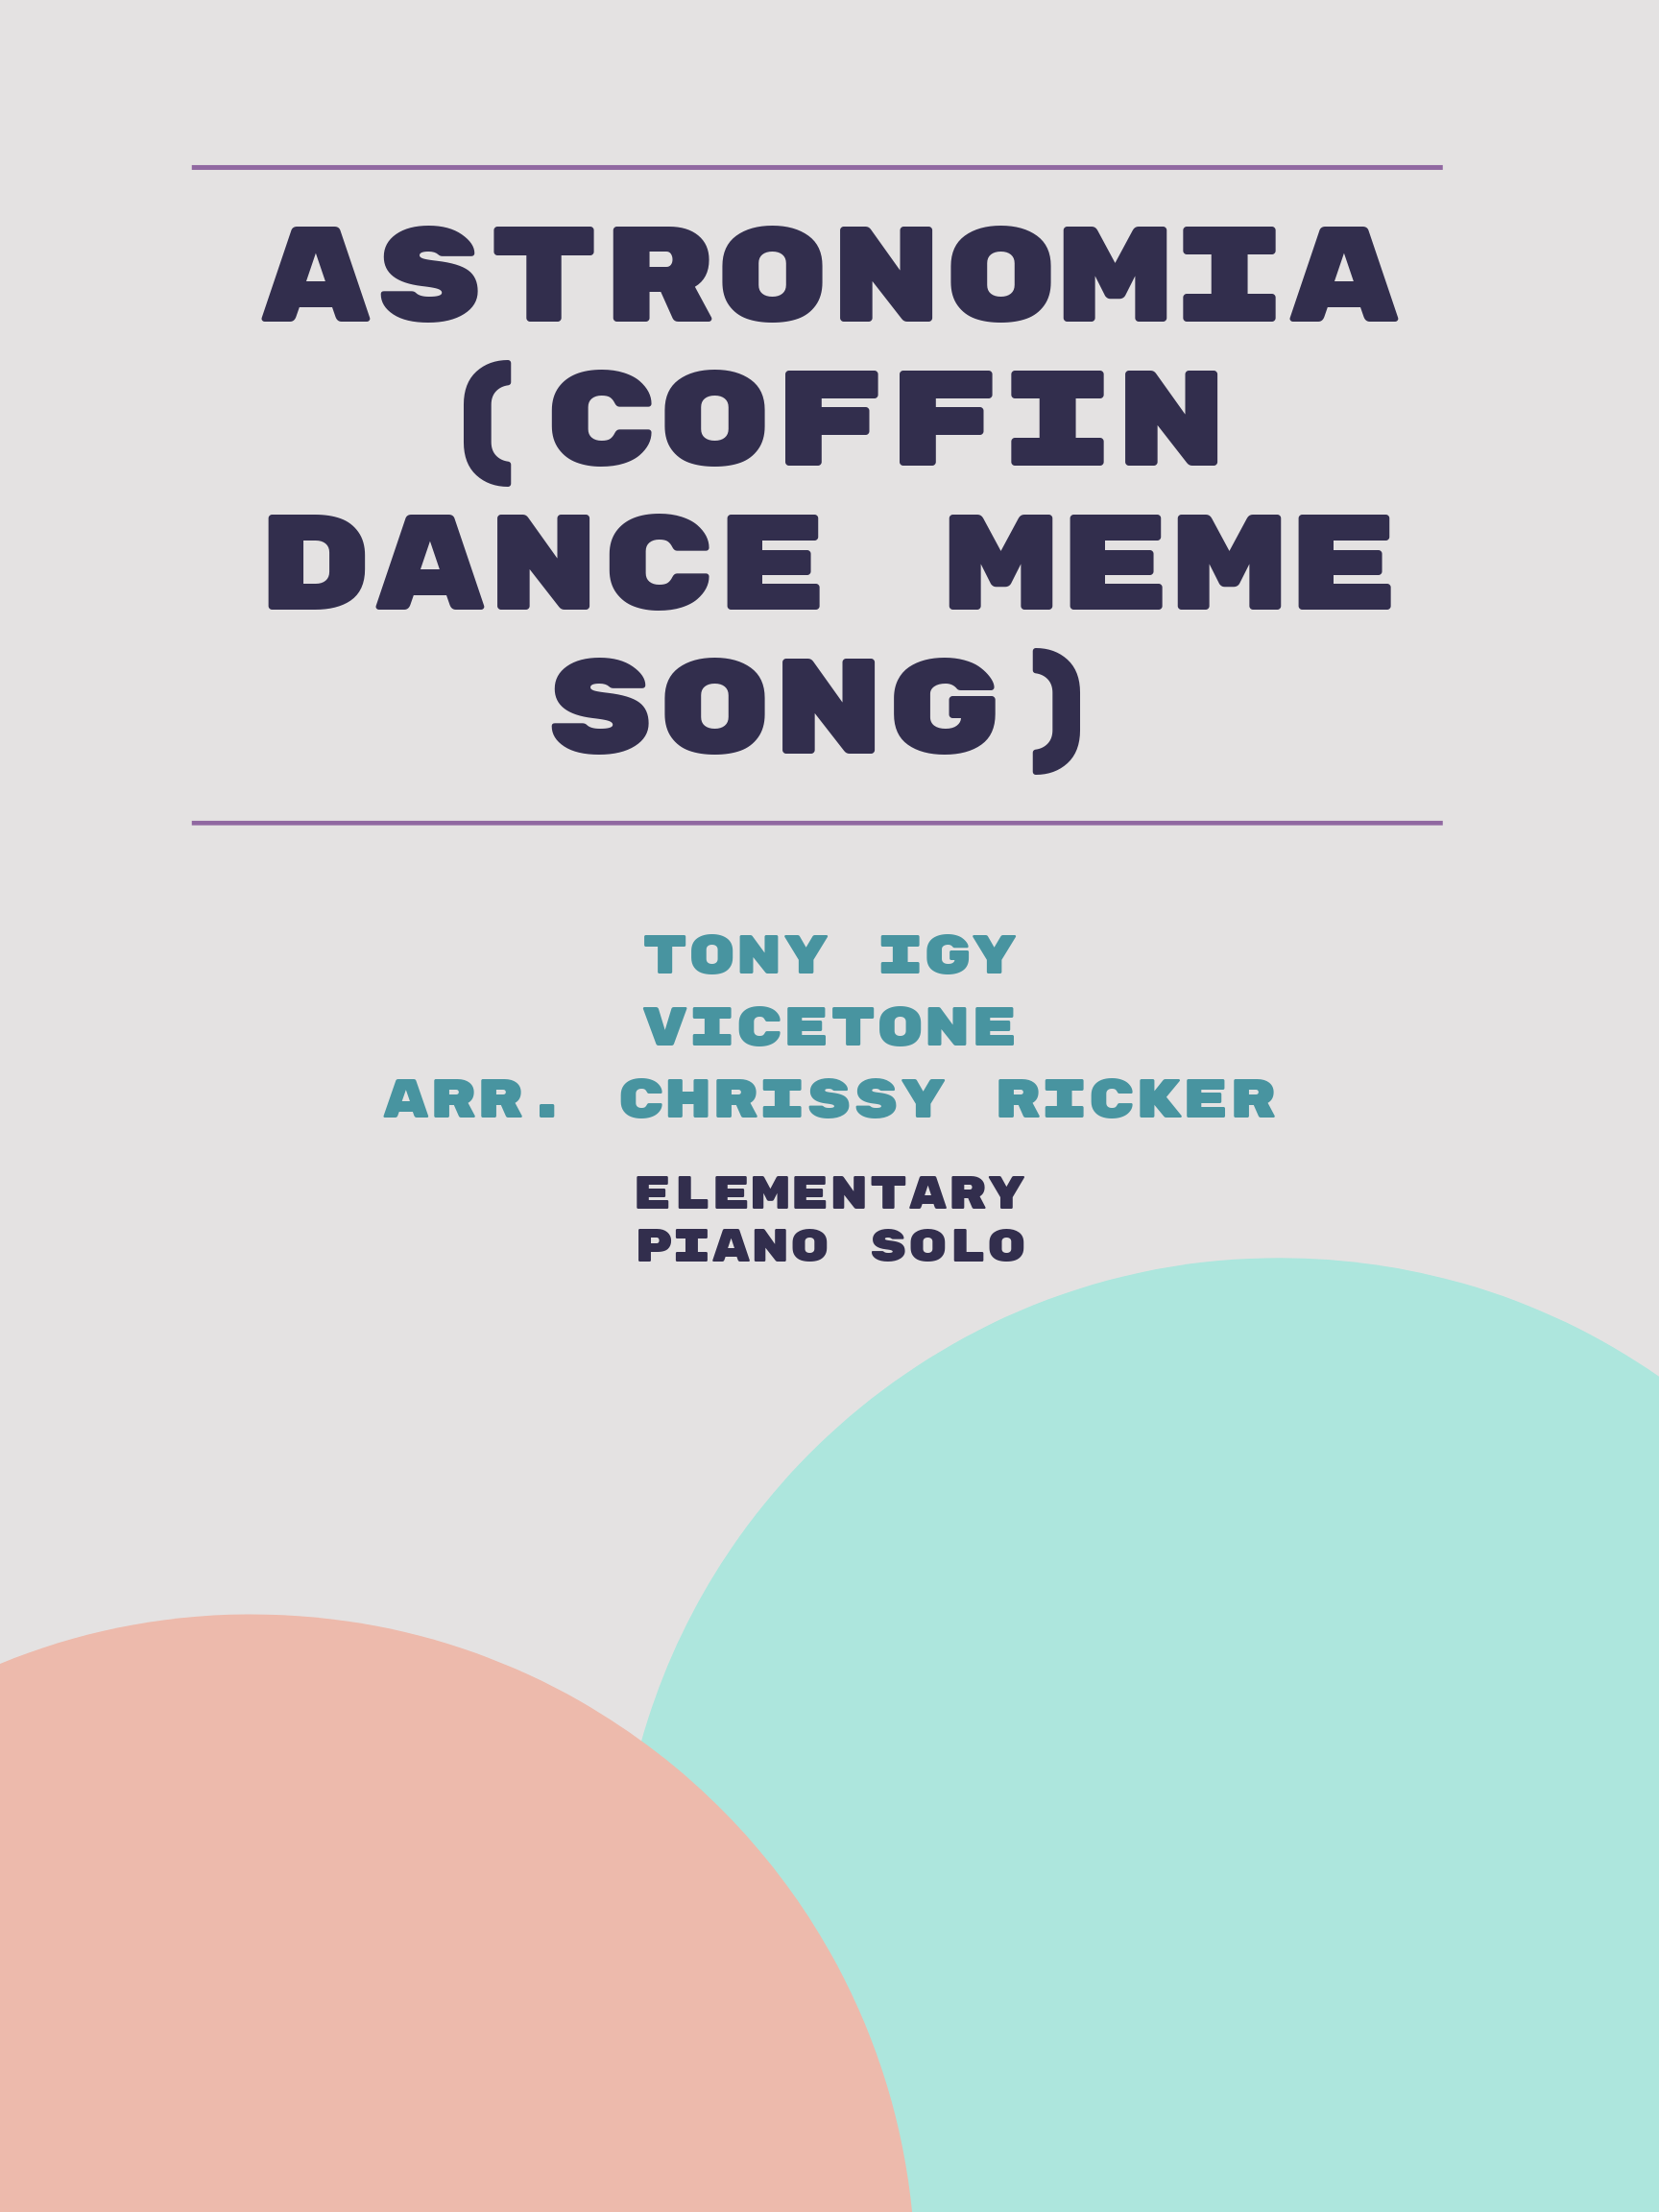 Astronomia (Coffin Dance Meme Song) Sample Page